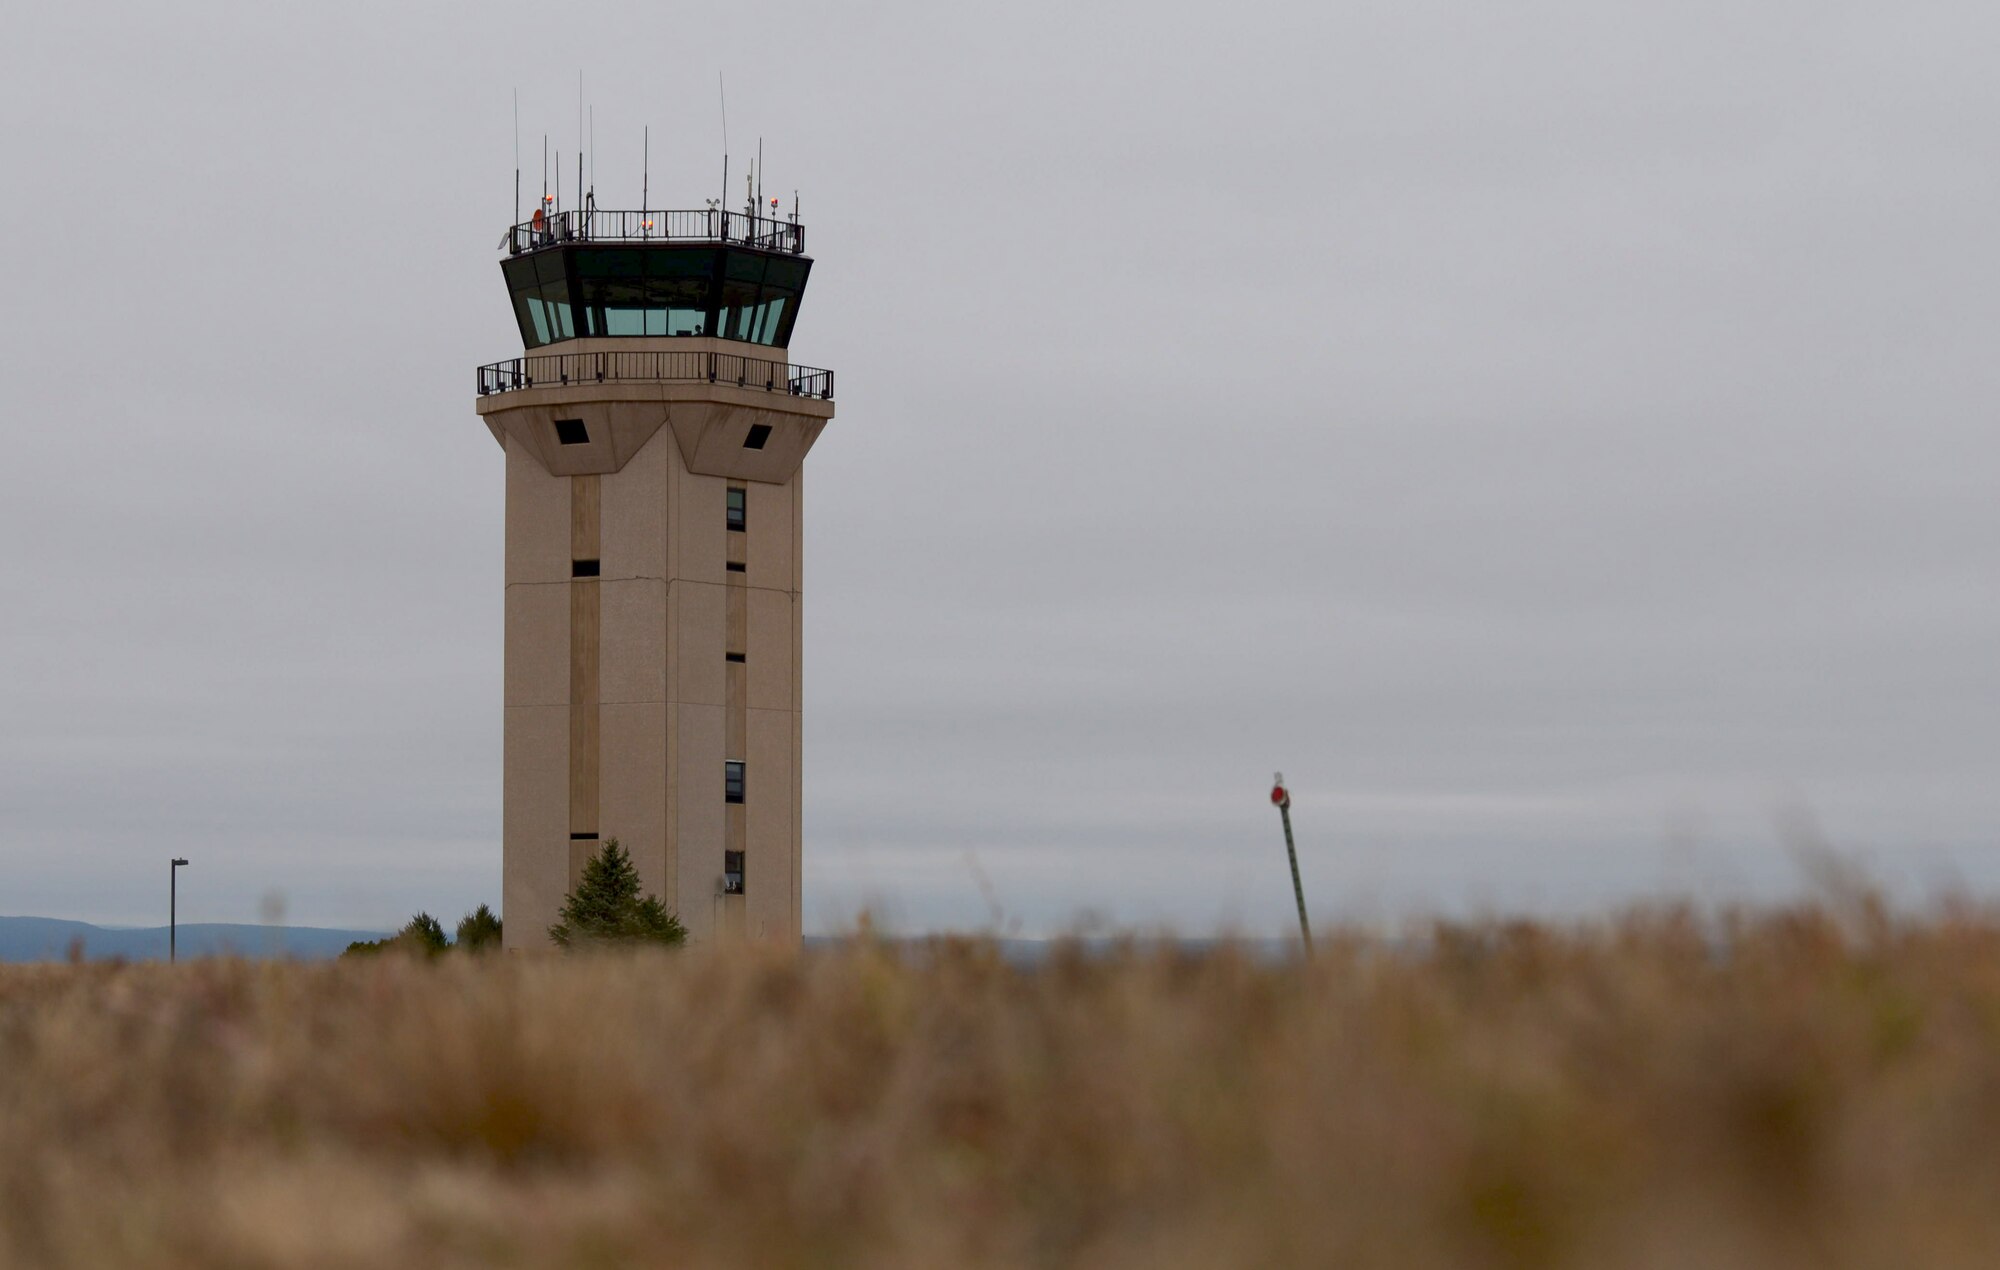 Air traffic controllers, assigned to the 28th Operations Support Squadron, coordinate with aircraft at Ellsworth Air Force Base, S.D., Nov. 17, 2016. The Air Traffic Control Tower provides flight safety for all incoming and outgoing aircraft. (U.S. Air Force photo by Airman 1st Class Donald C. Knechtel)

